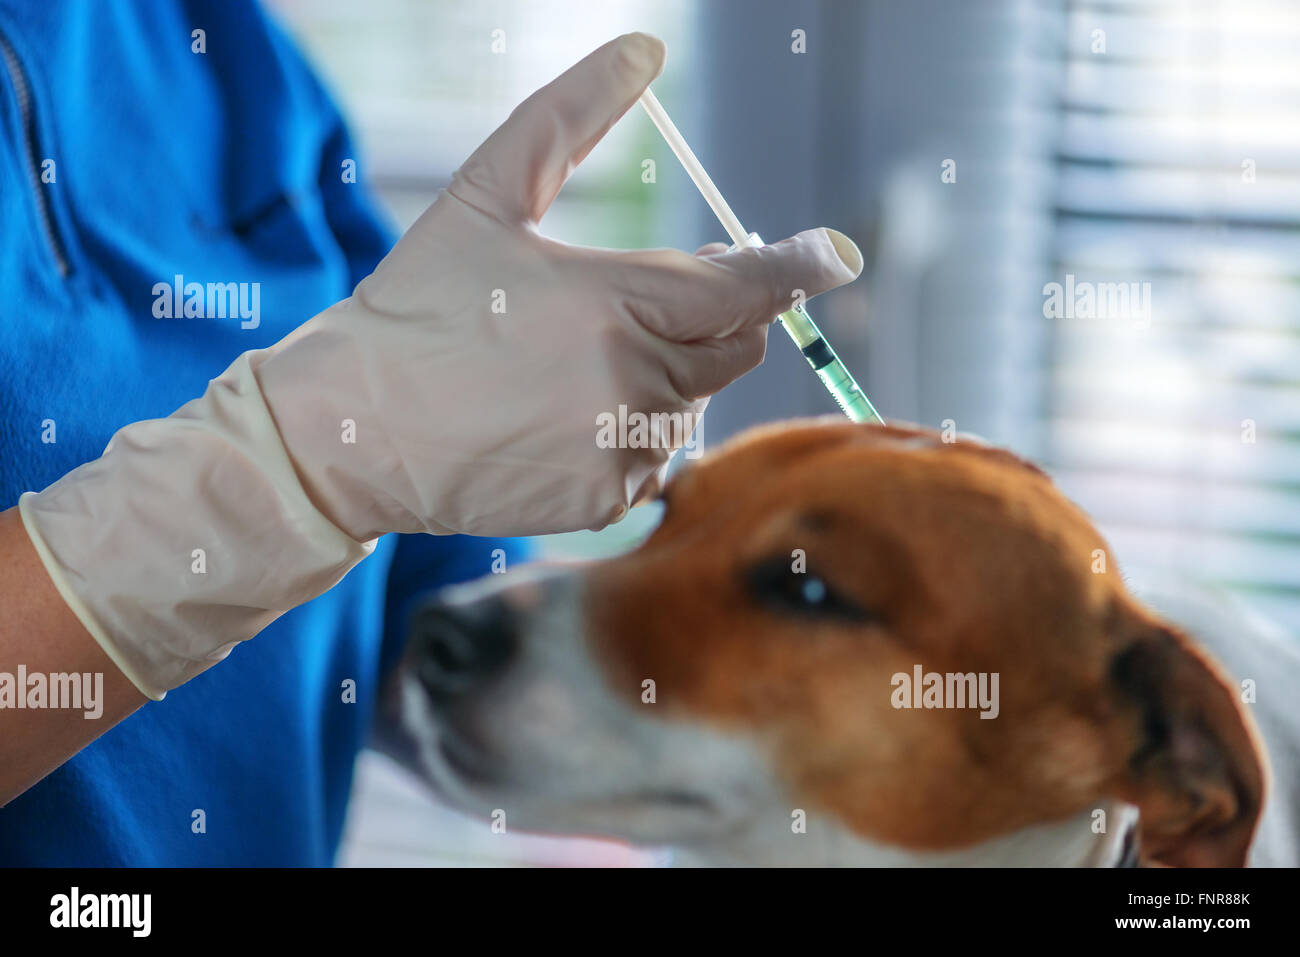 dog injecting by vet doctor Stock Photo